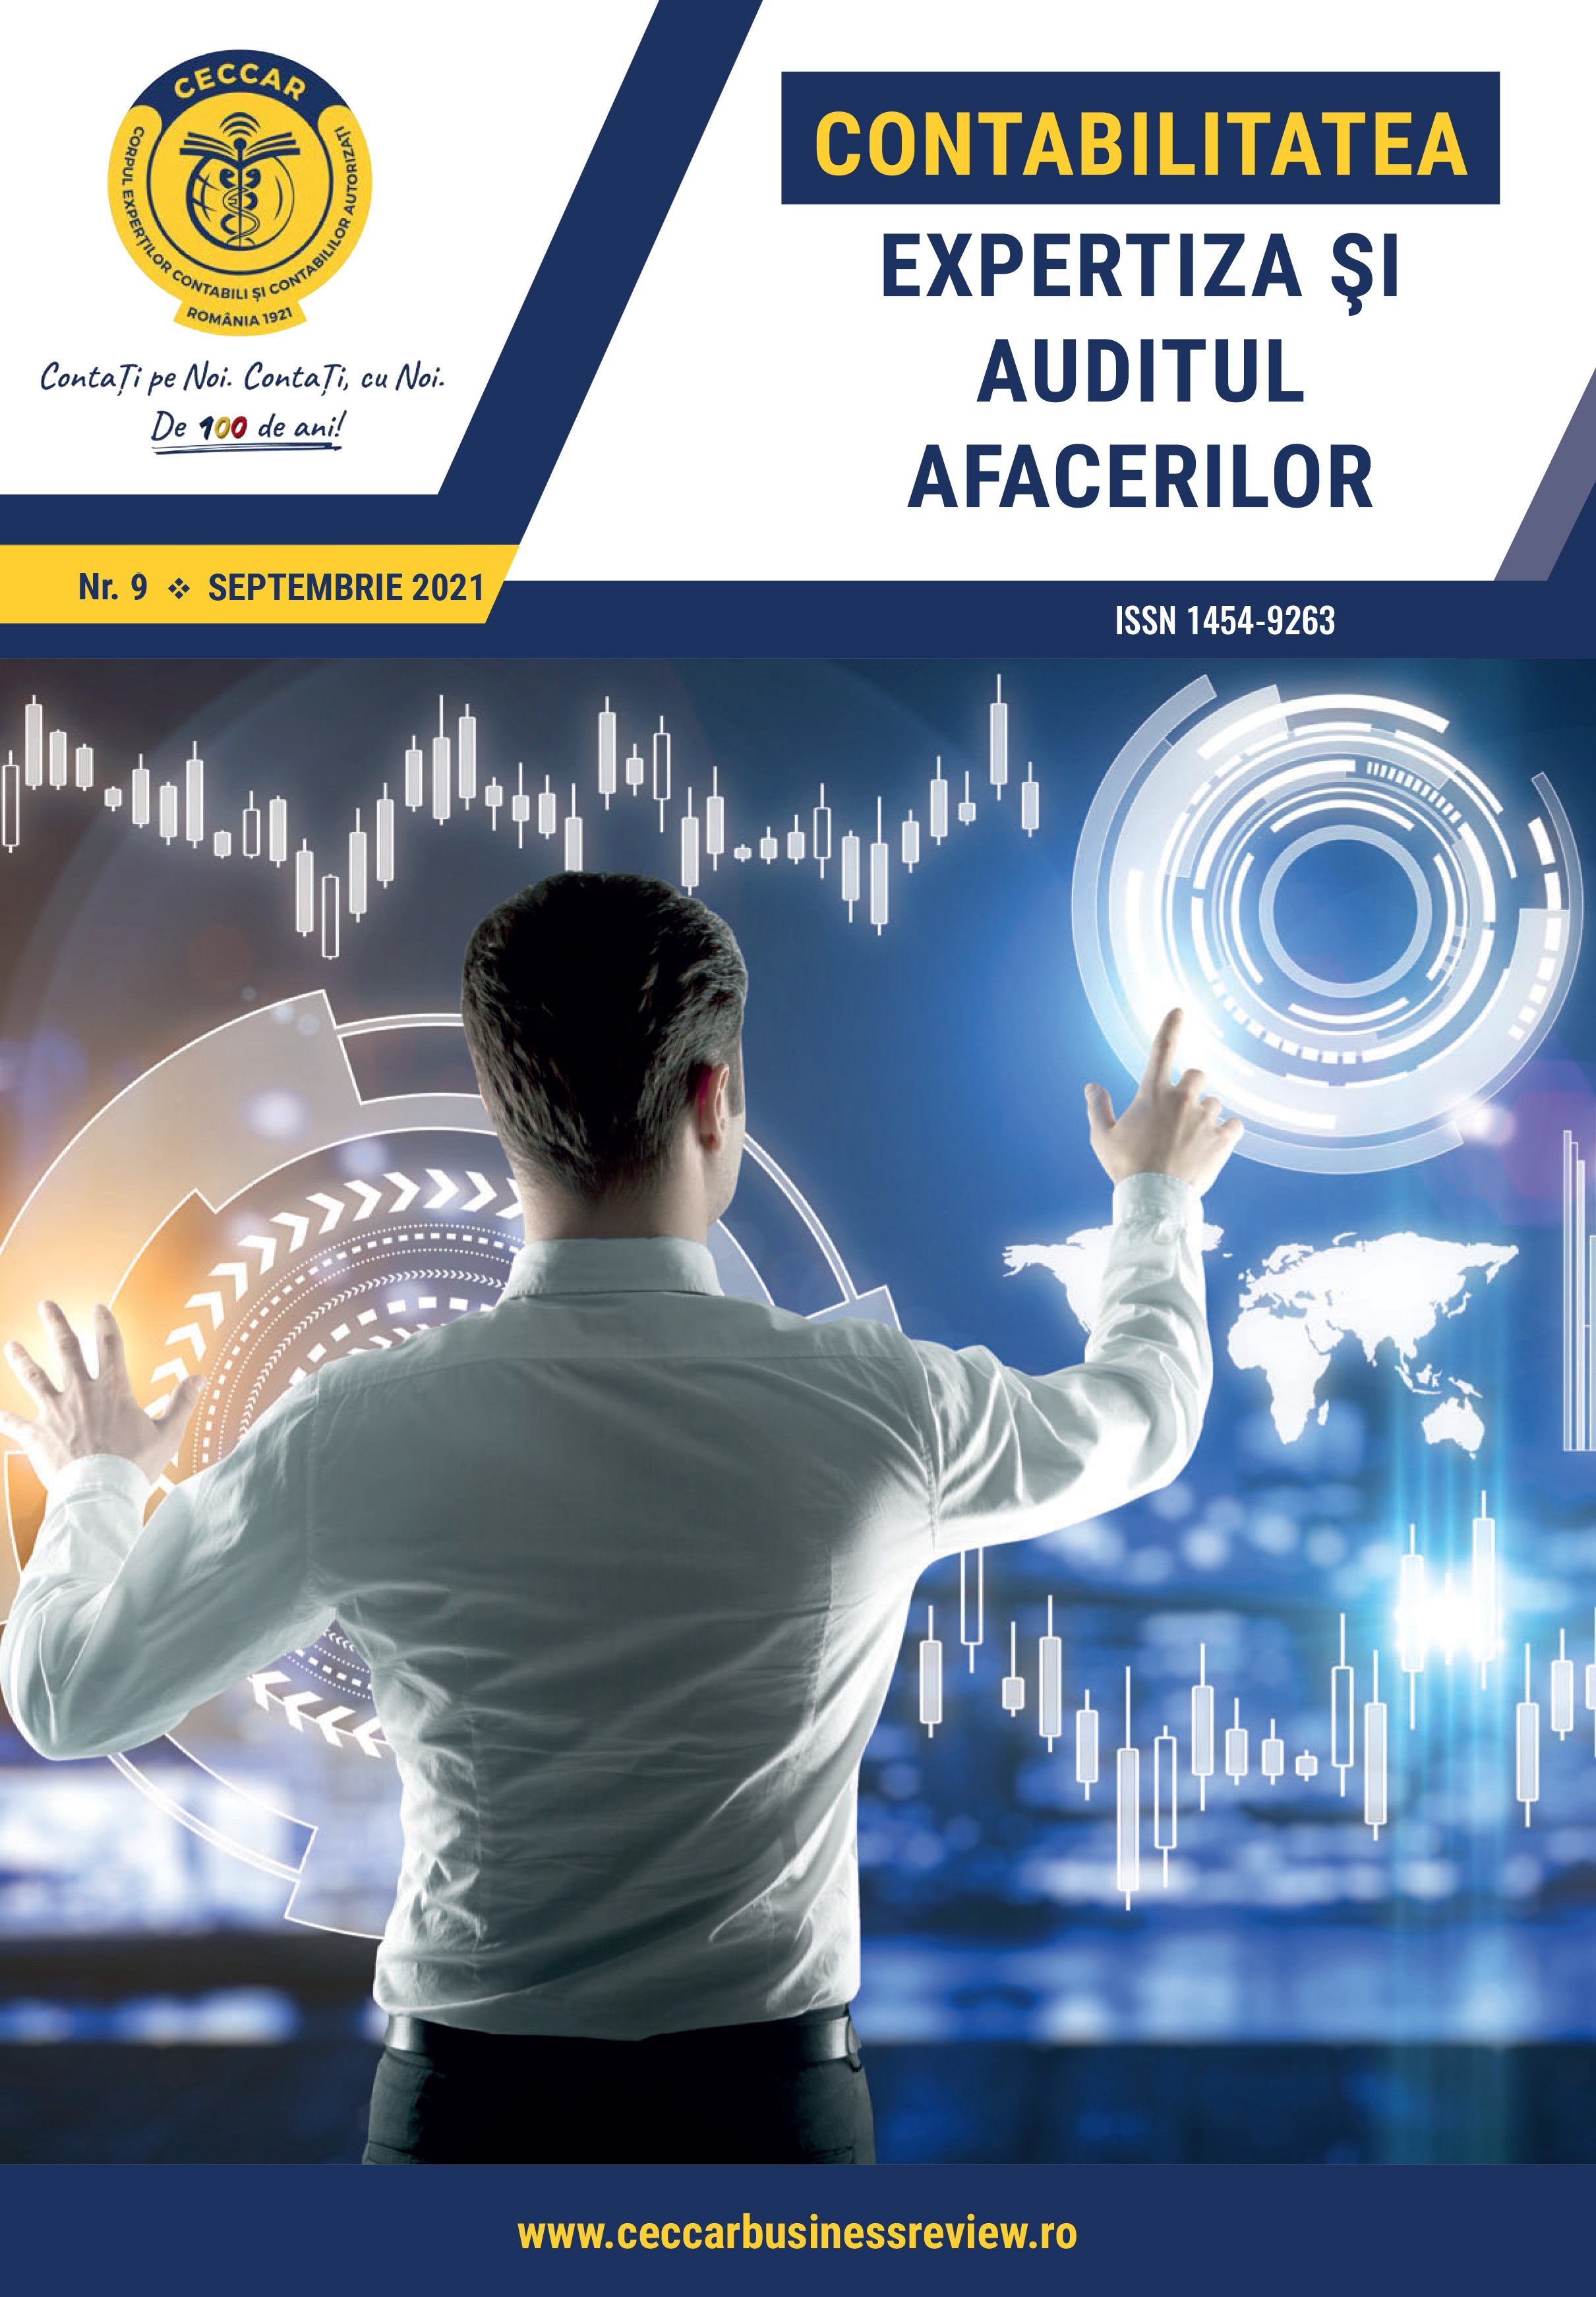 Accounting Principles Compliance – the True and Fair View Recipe. A Theoretical Perspective on the Contribution of Accounting Principles to the Financial Reporting Objective Achievement (II) Cover Image